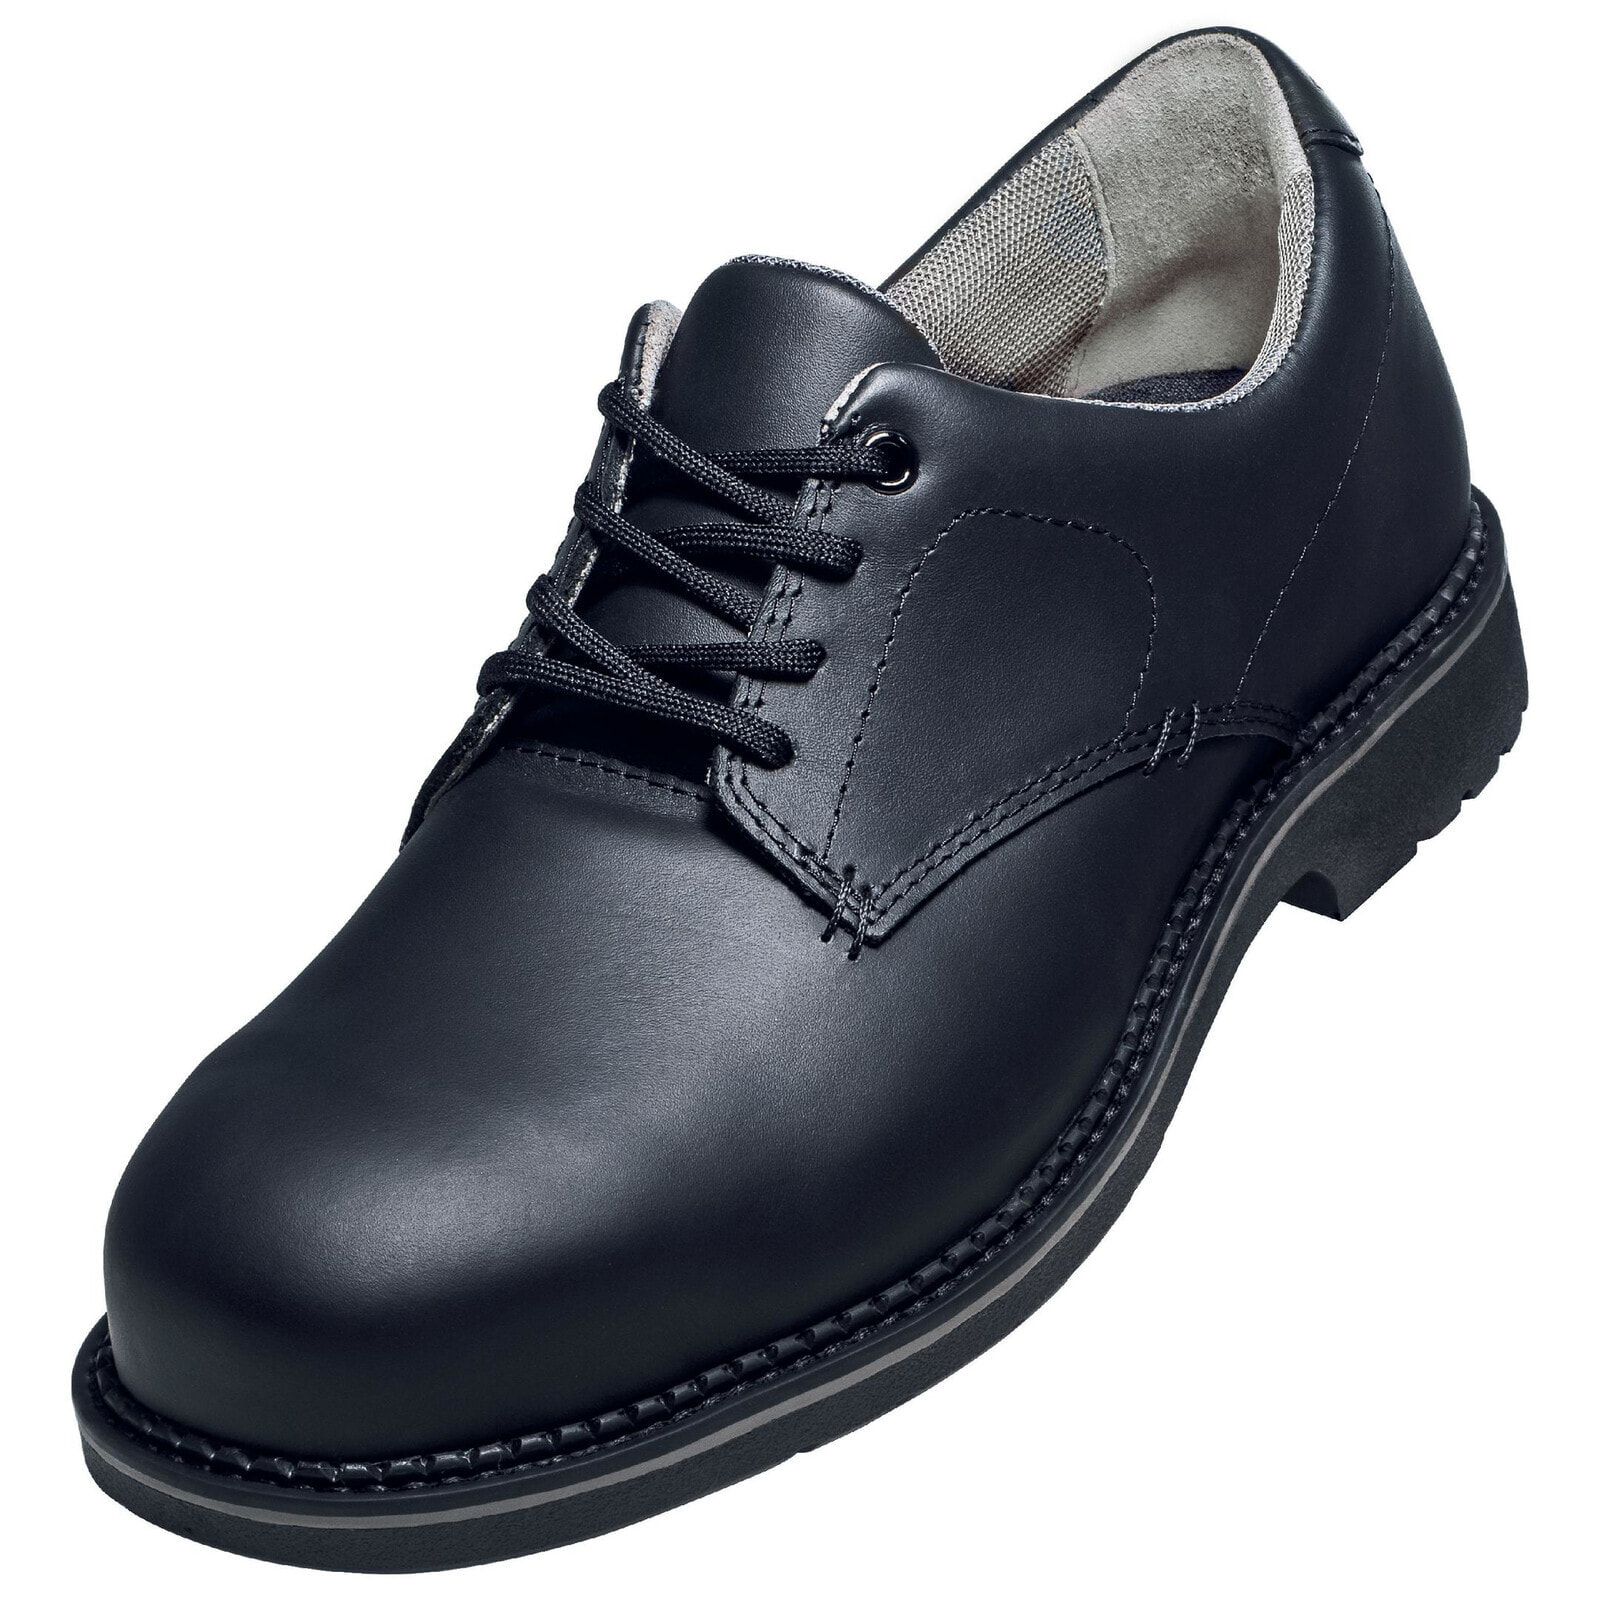 UVEX Arbeitsschutz 84493 - Male - Adult - Safety shoes - Black - ESD - S3 - SRC - Lace-up closure